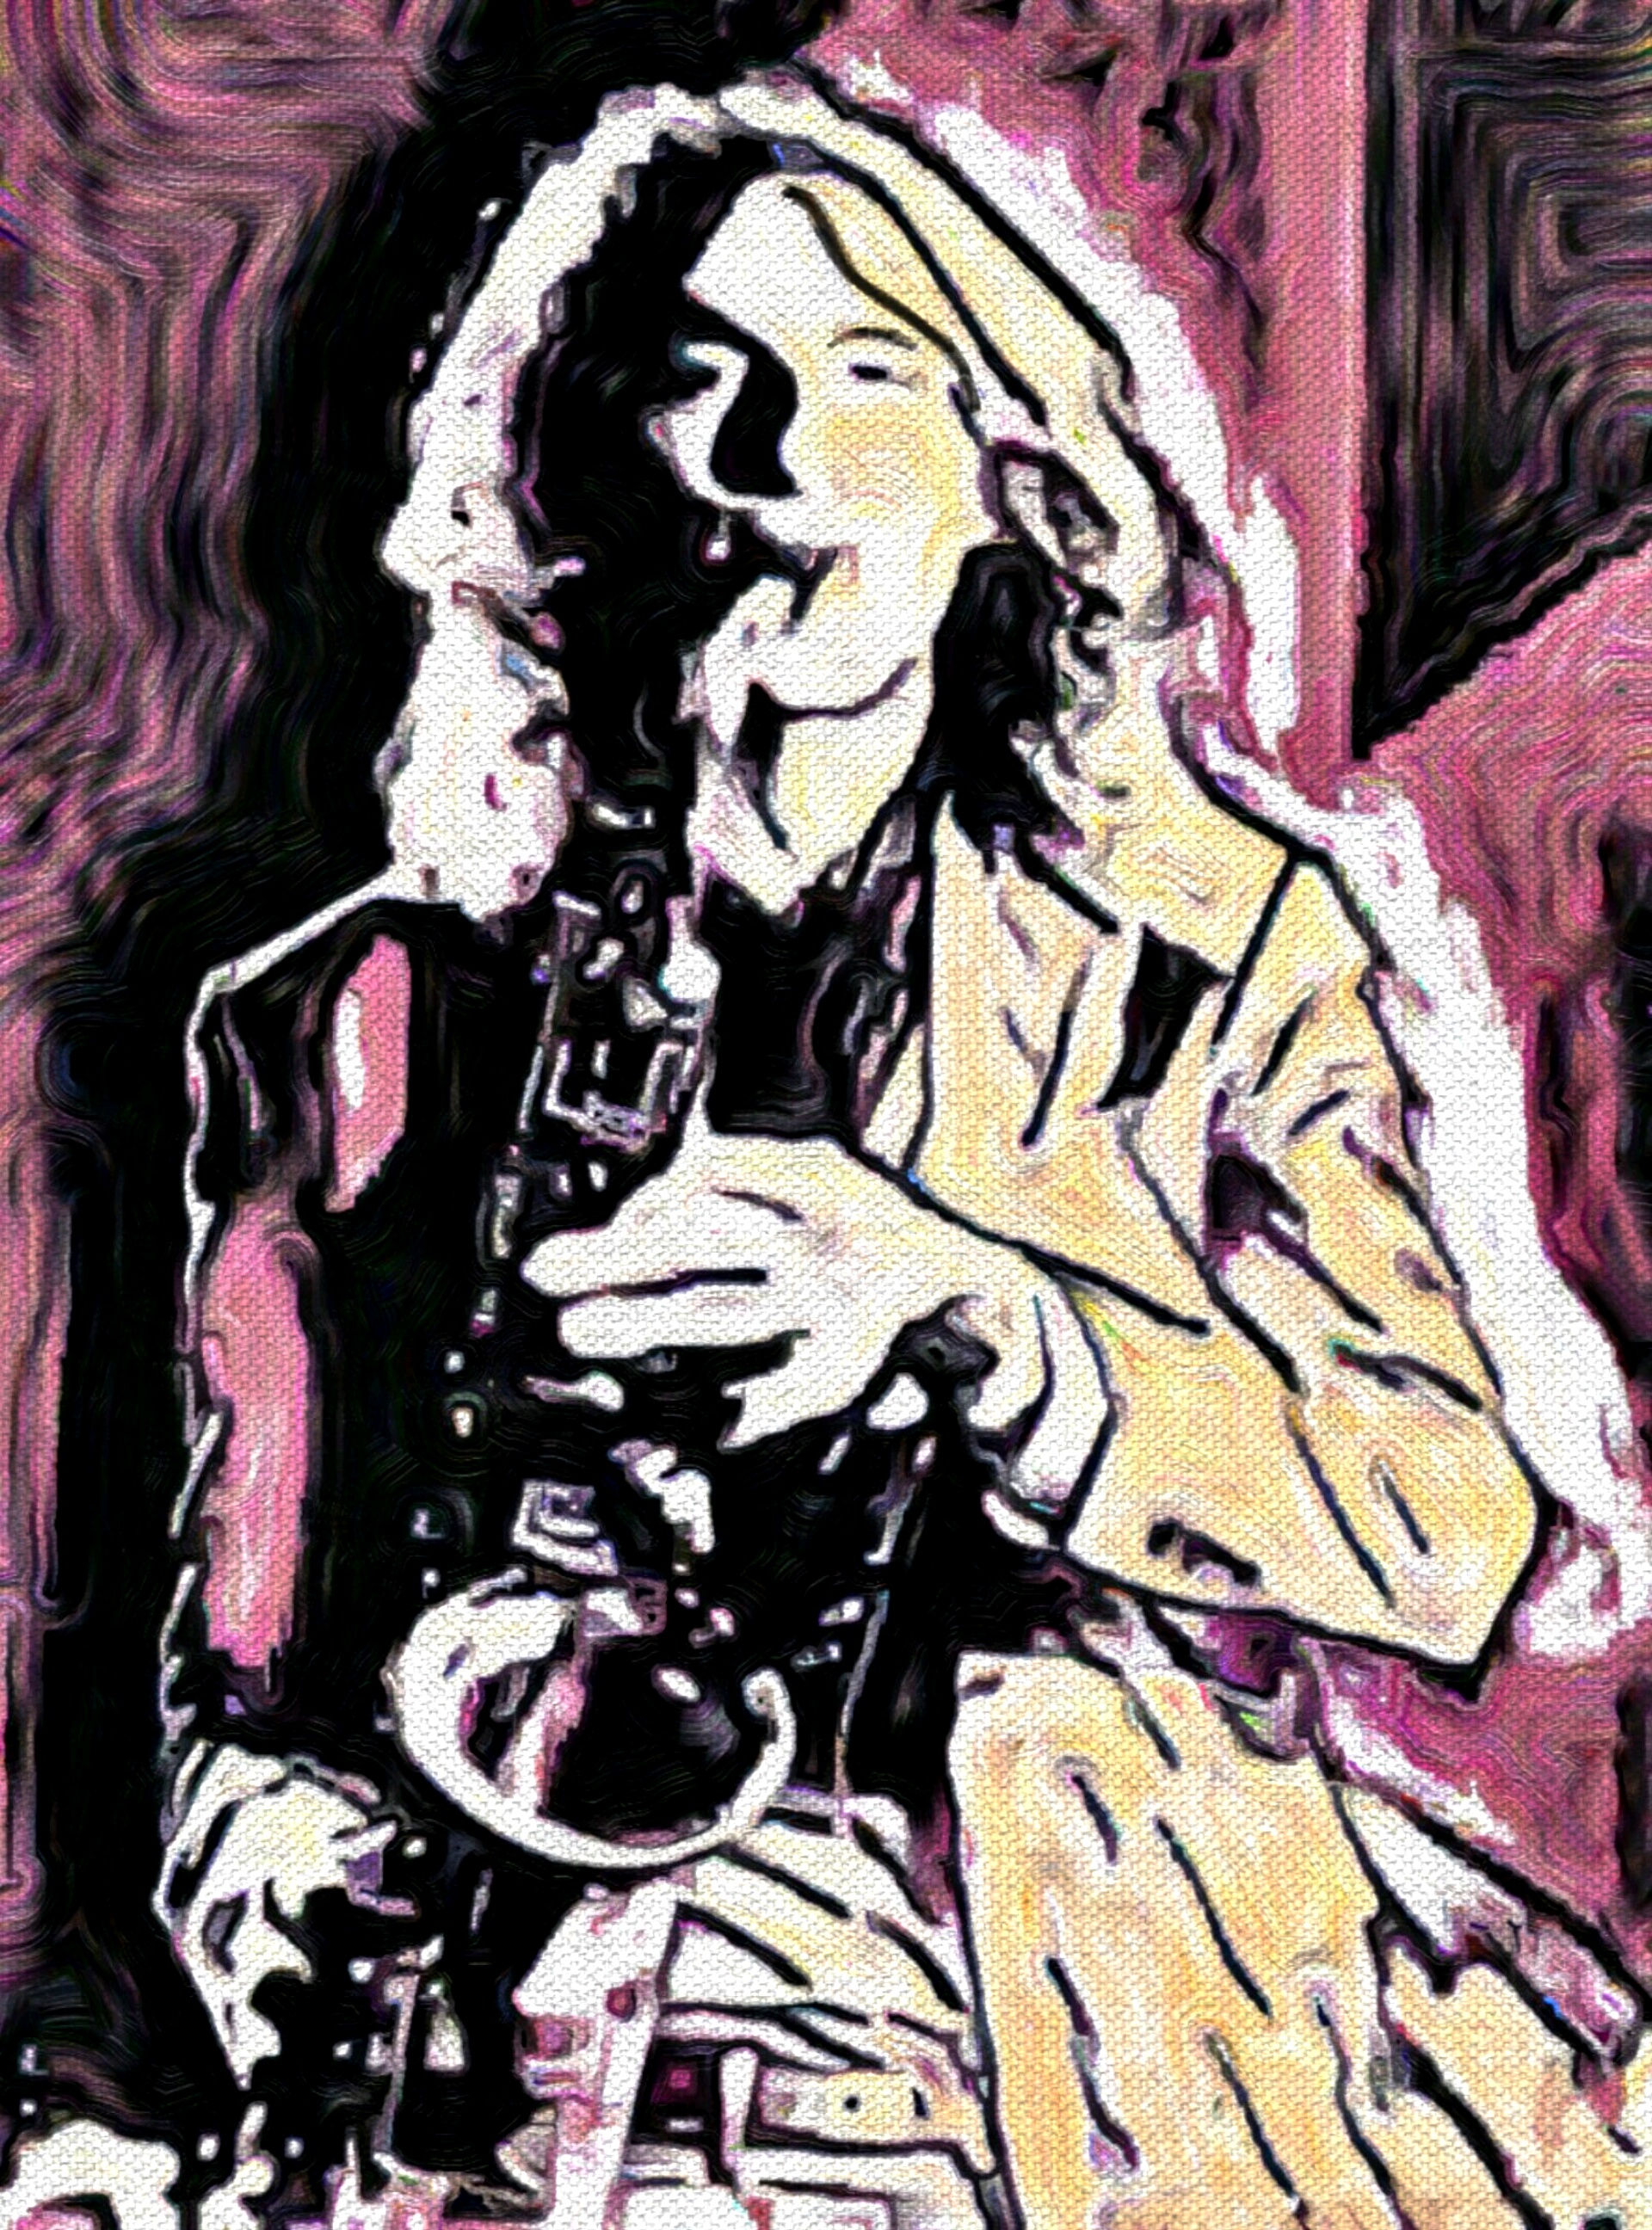 Kenny G Blue Note PopArt ll 2018